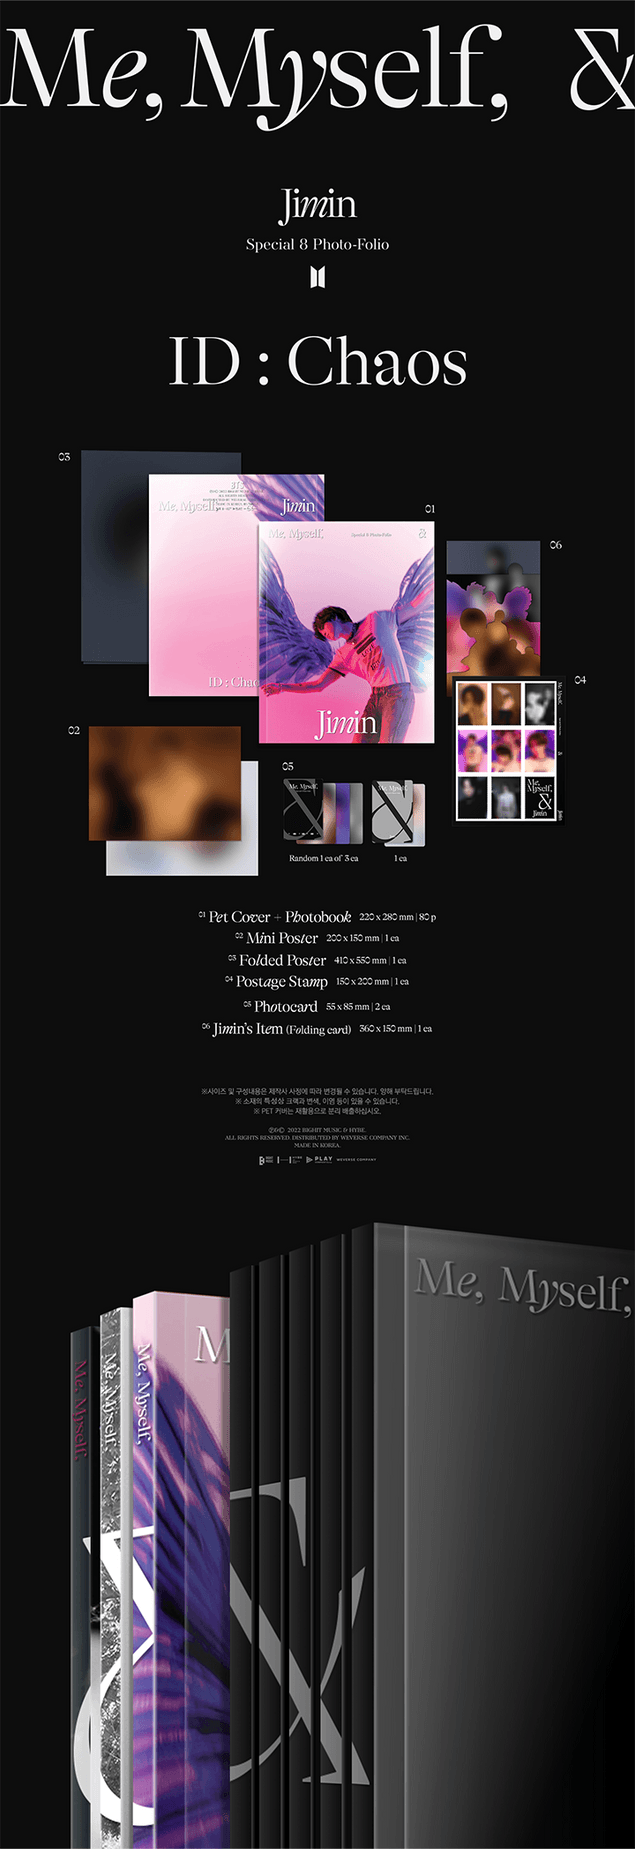 JIMIN SPECIAL 8 PHOTO-FOLIO ME, MYSELF, AND JIMIN 'ID : CHAOS' DETAIL